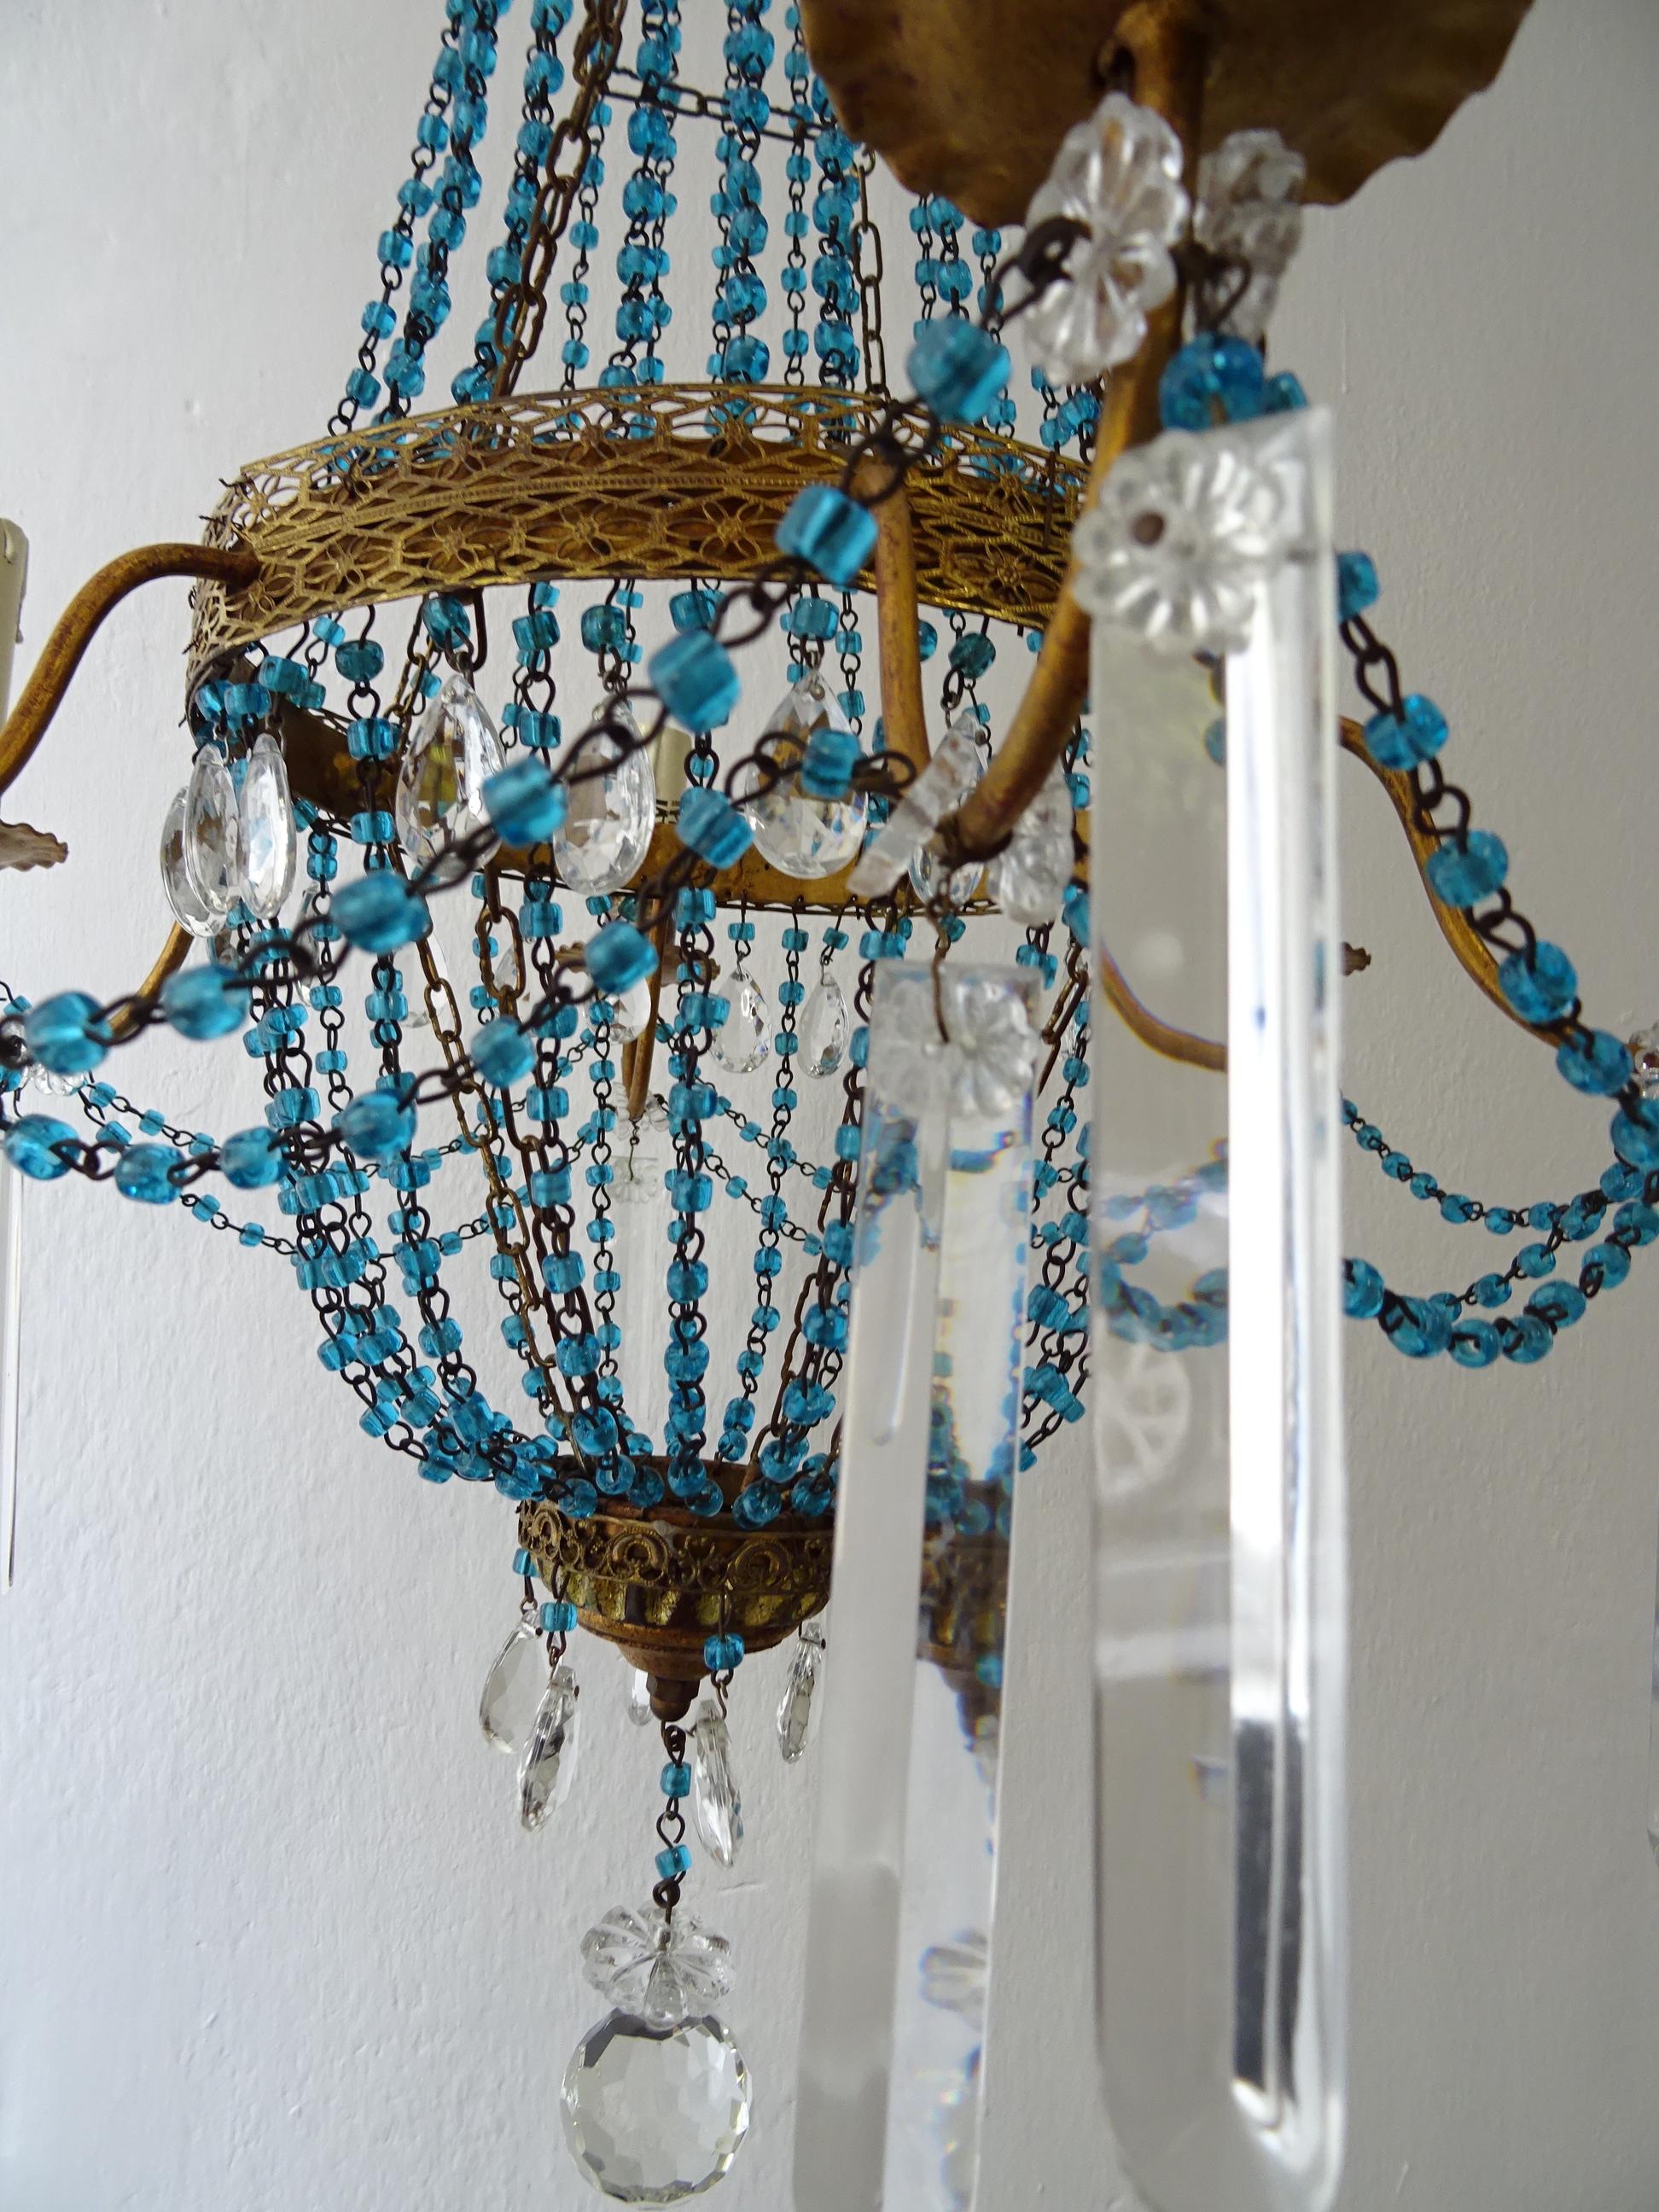 Italian Empire Blue Glass Beads Crystal Prisms Tole Chandelier, c 1900 For Sale 1